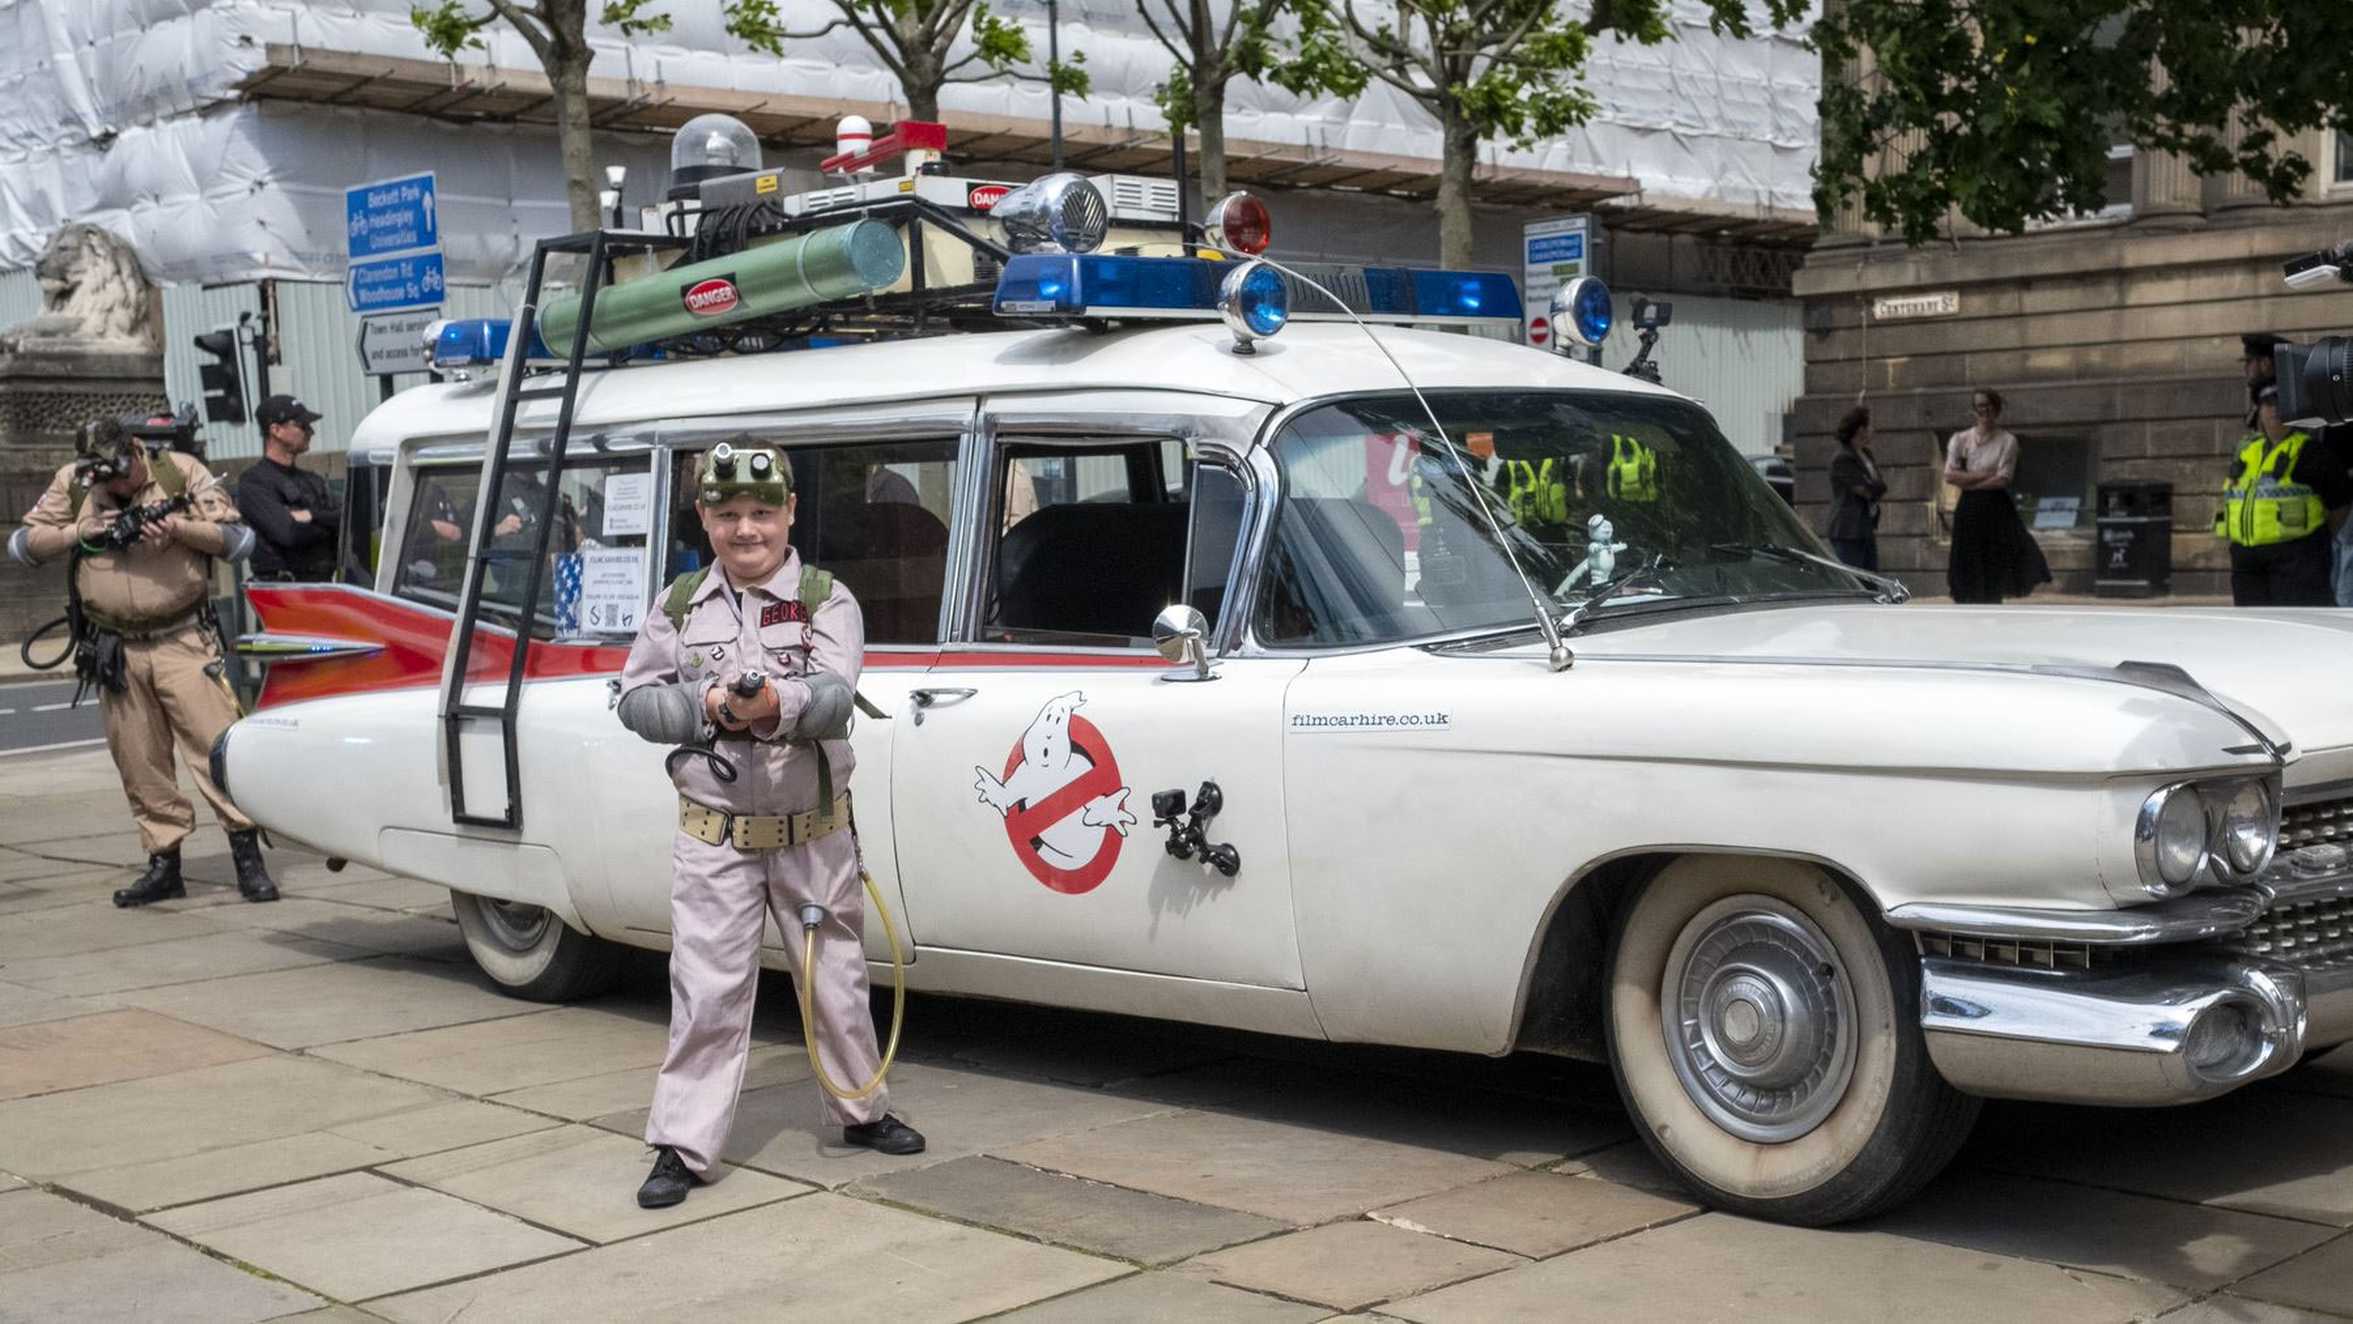 George posing with Ecto 1 outside Leeds Library.